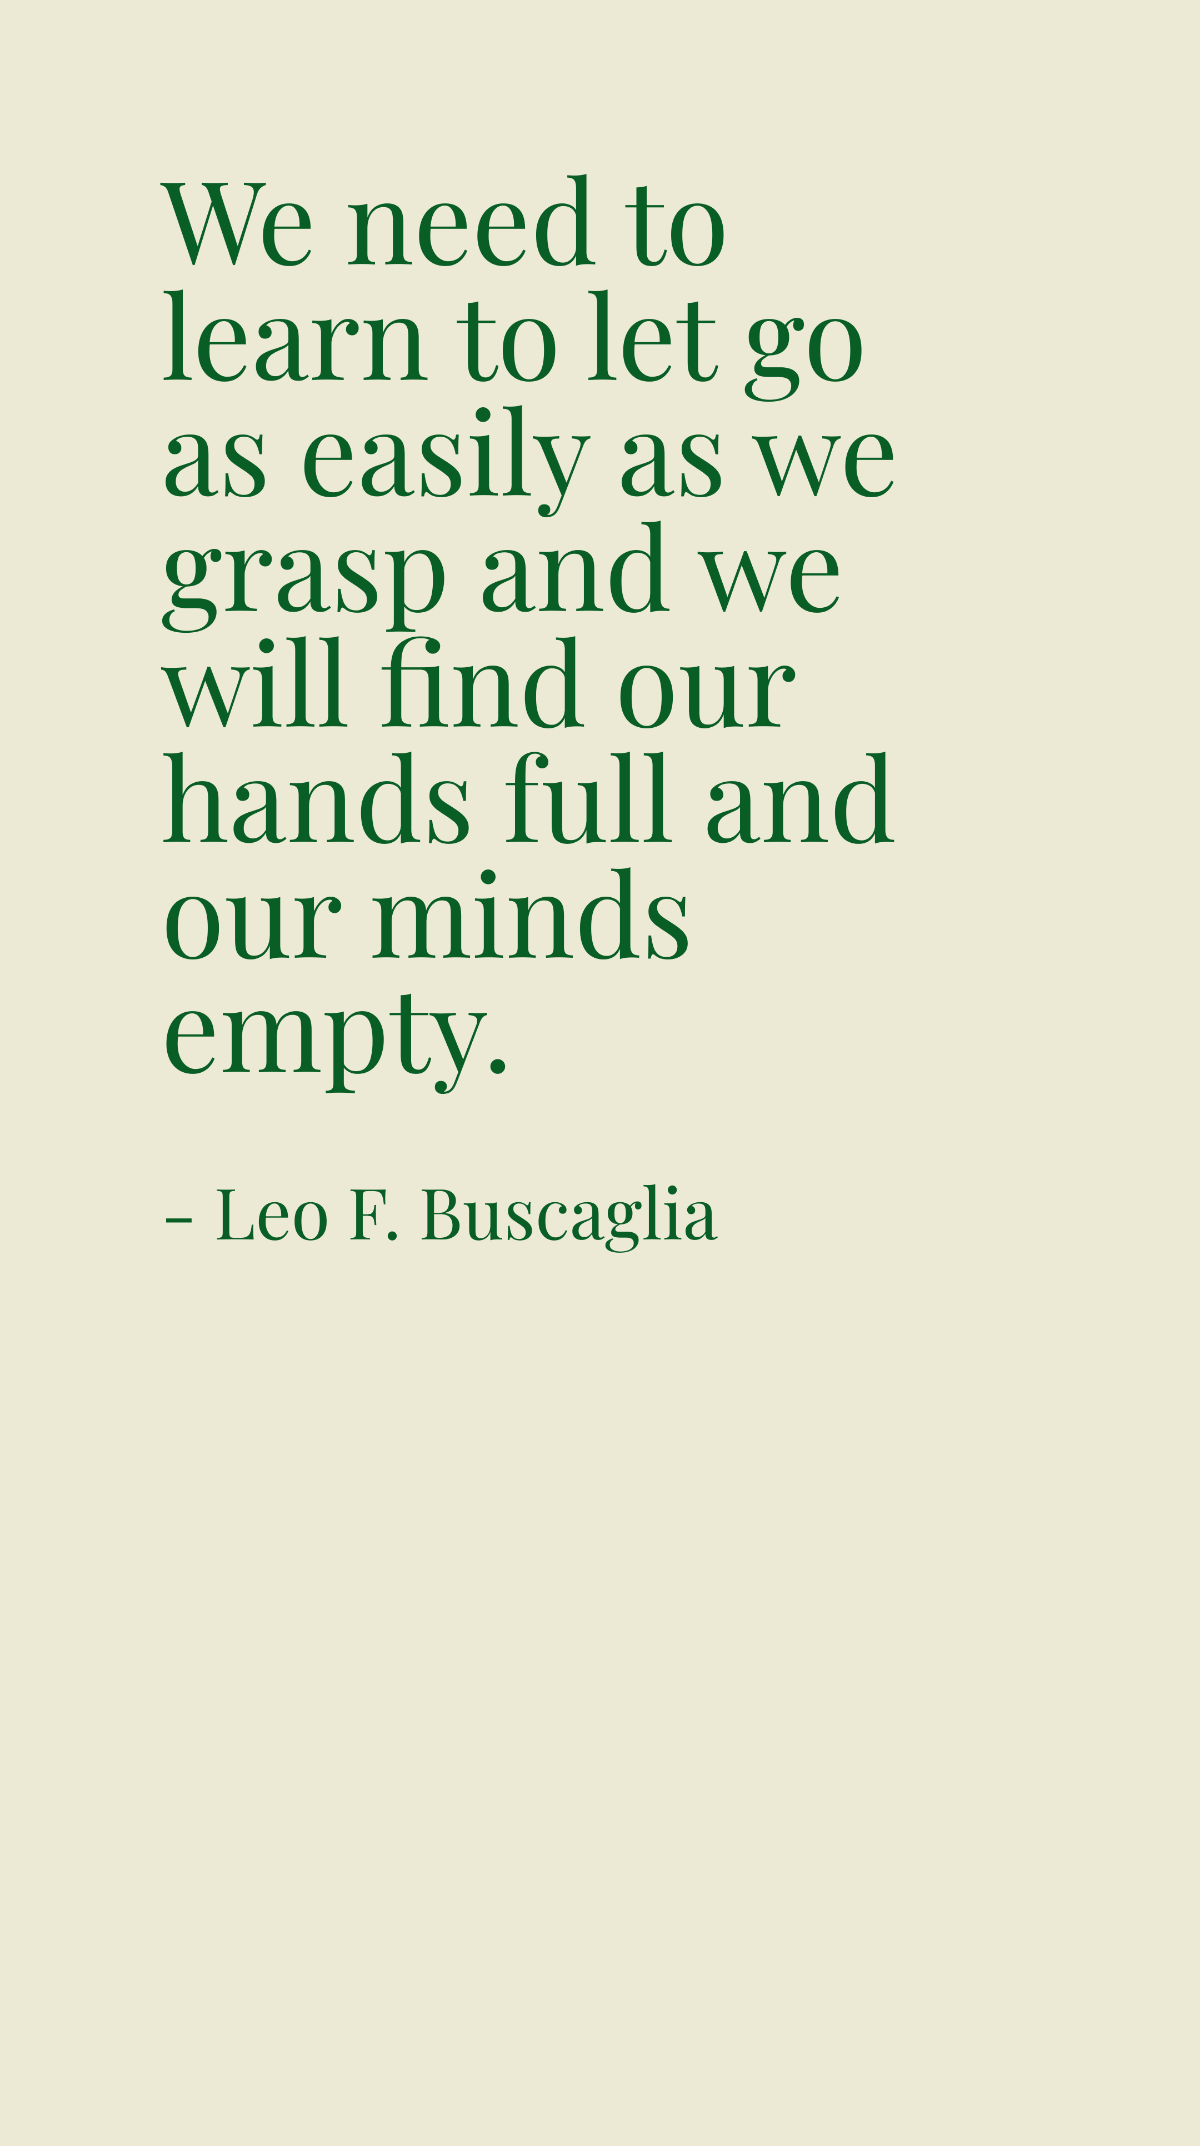 Leo F. Buscaglia - We need to learn to let go as easily as we grasp and we will find our hands full and our minds empty. Template